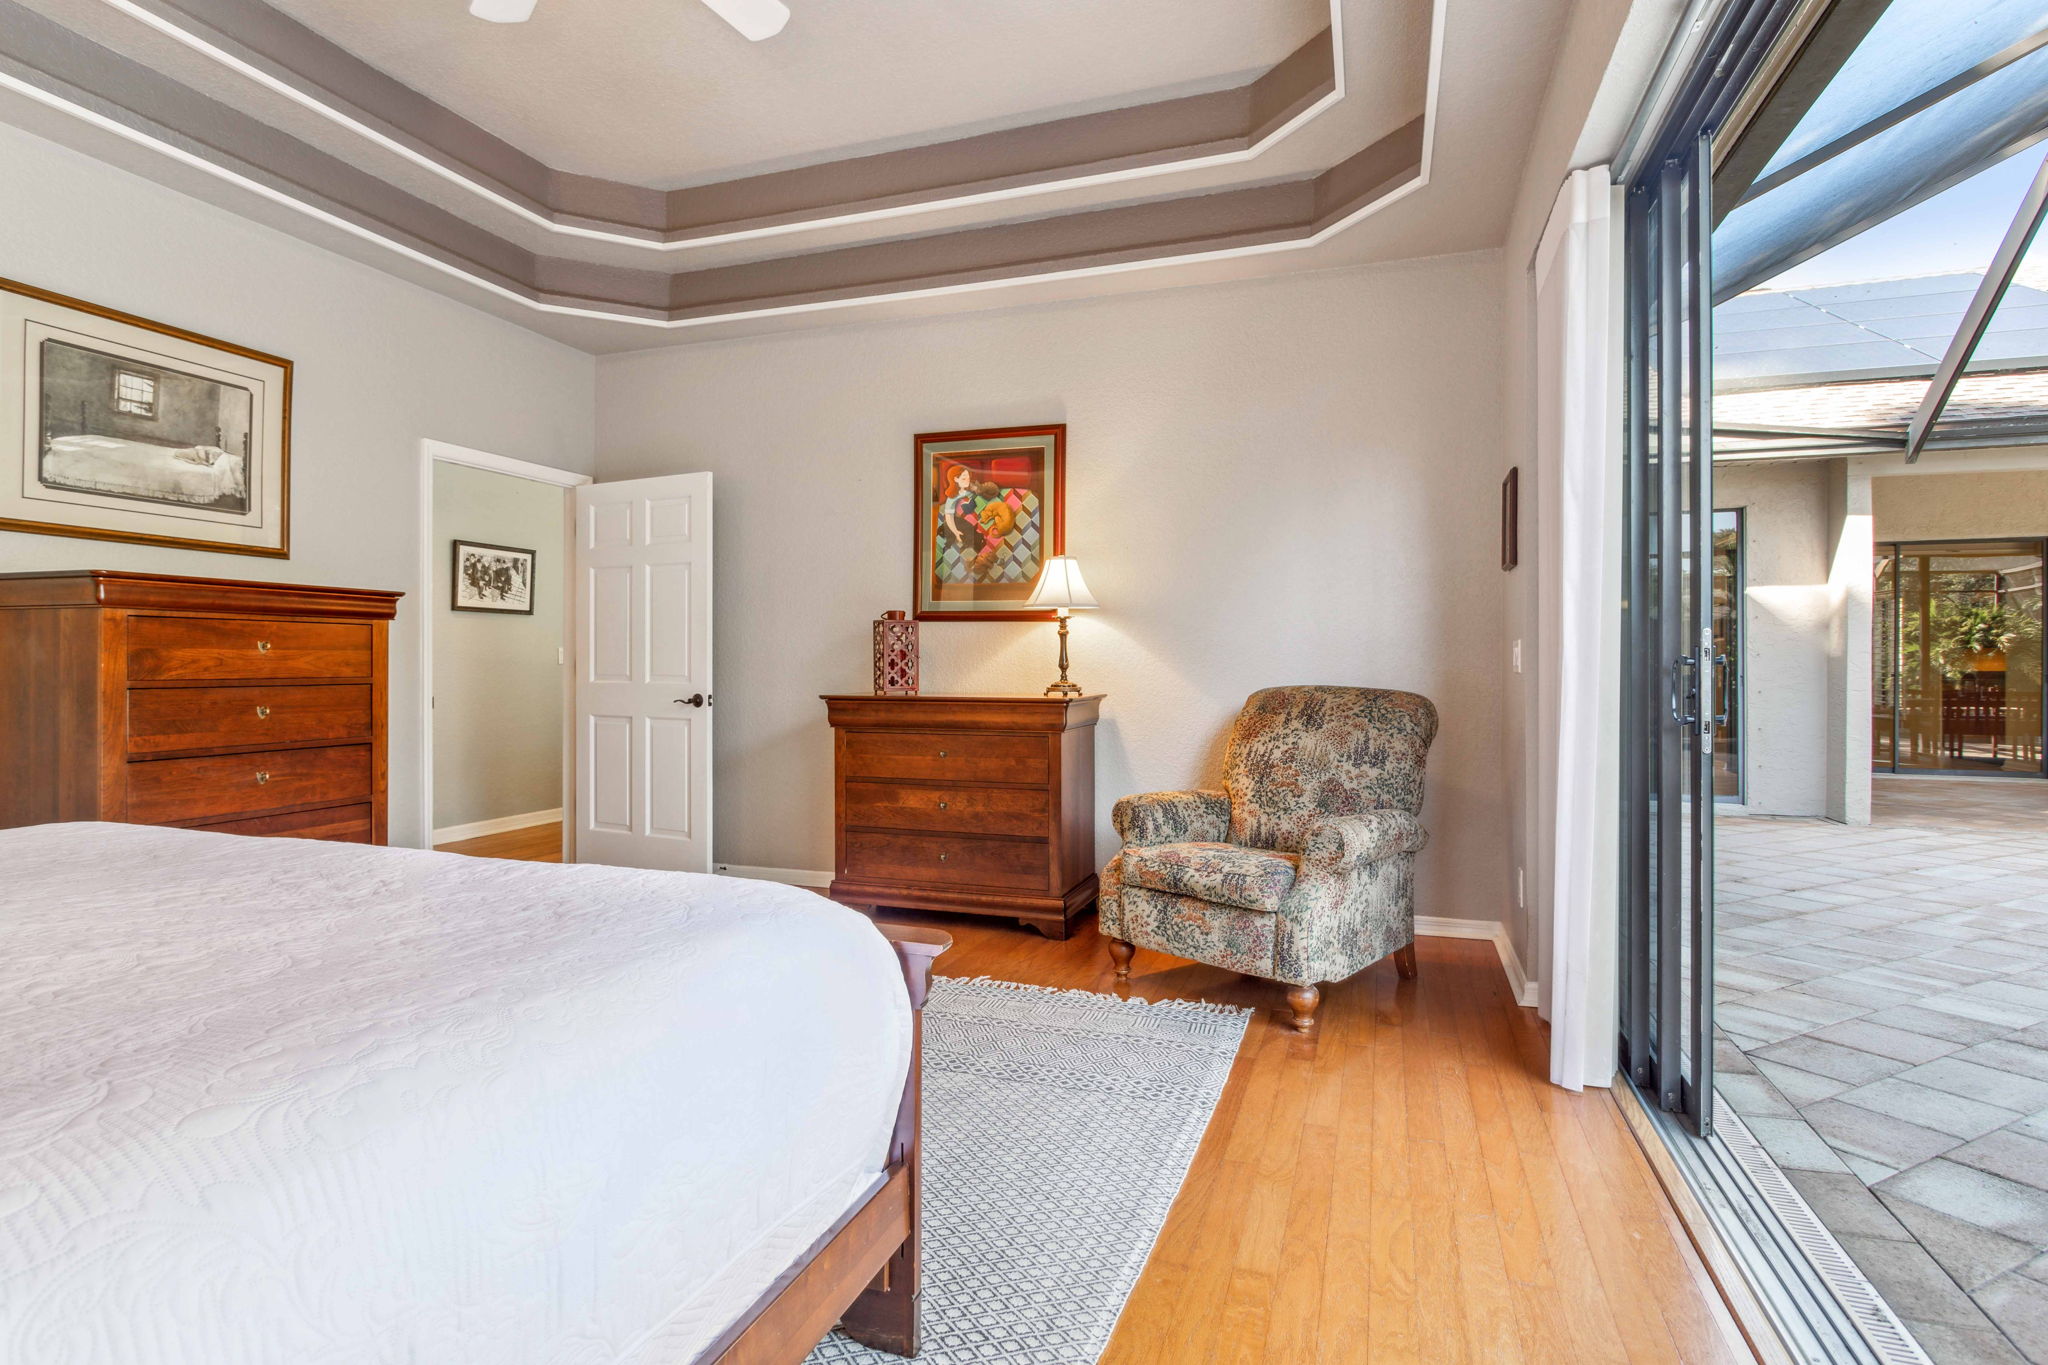 Spacious Primary Bedroom with beautiful tray ceiling